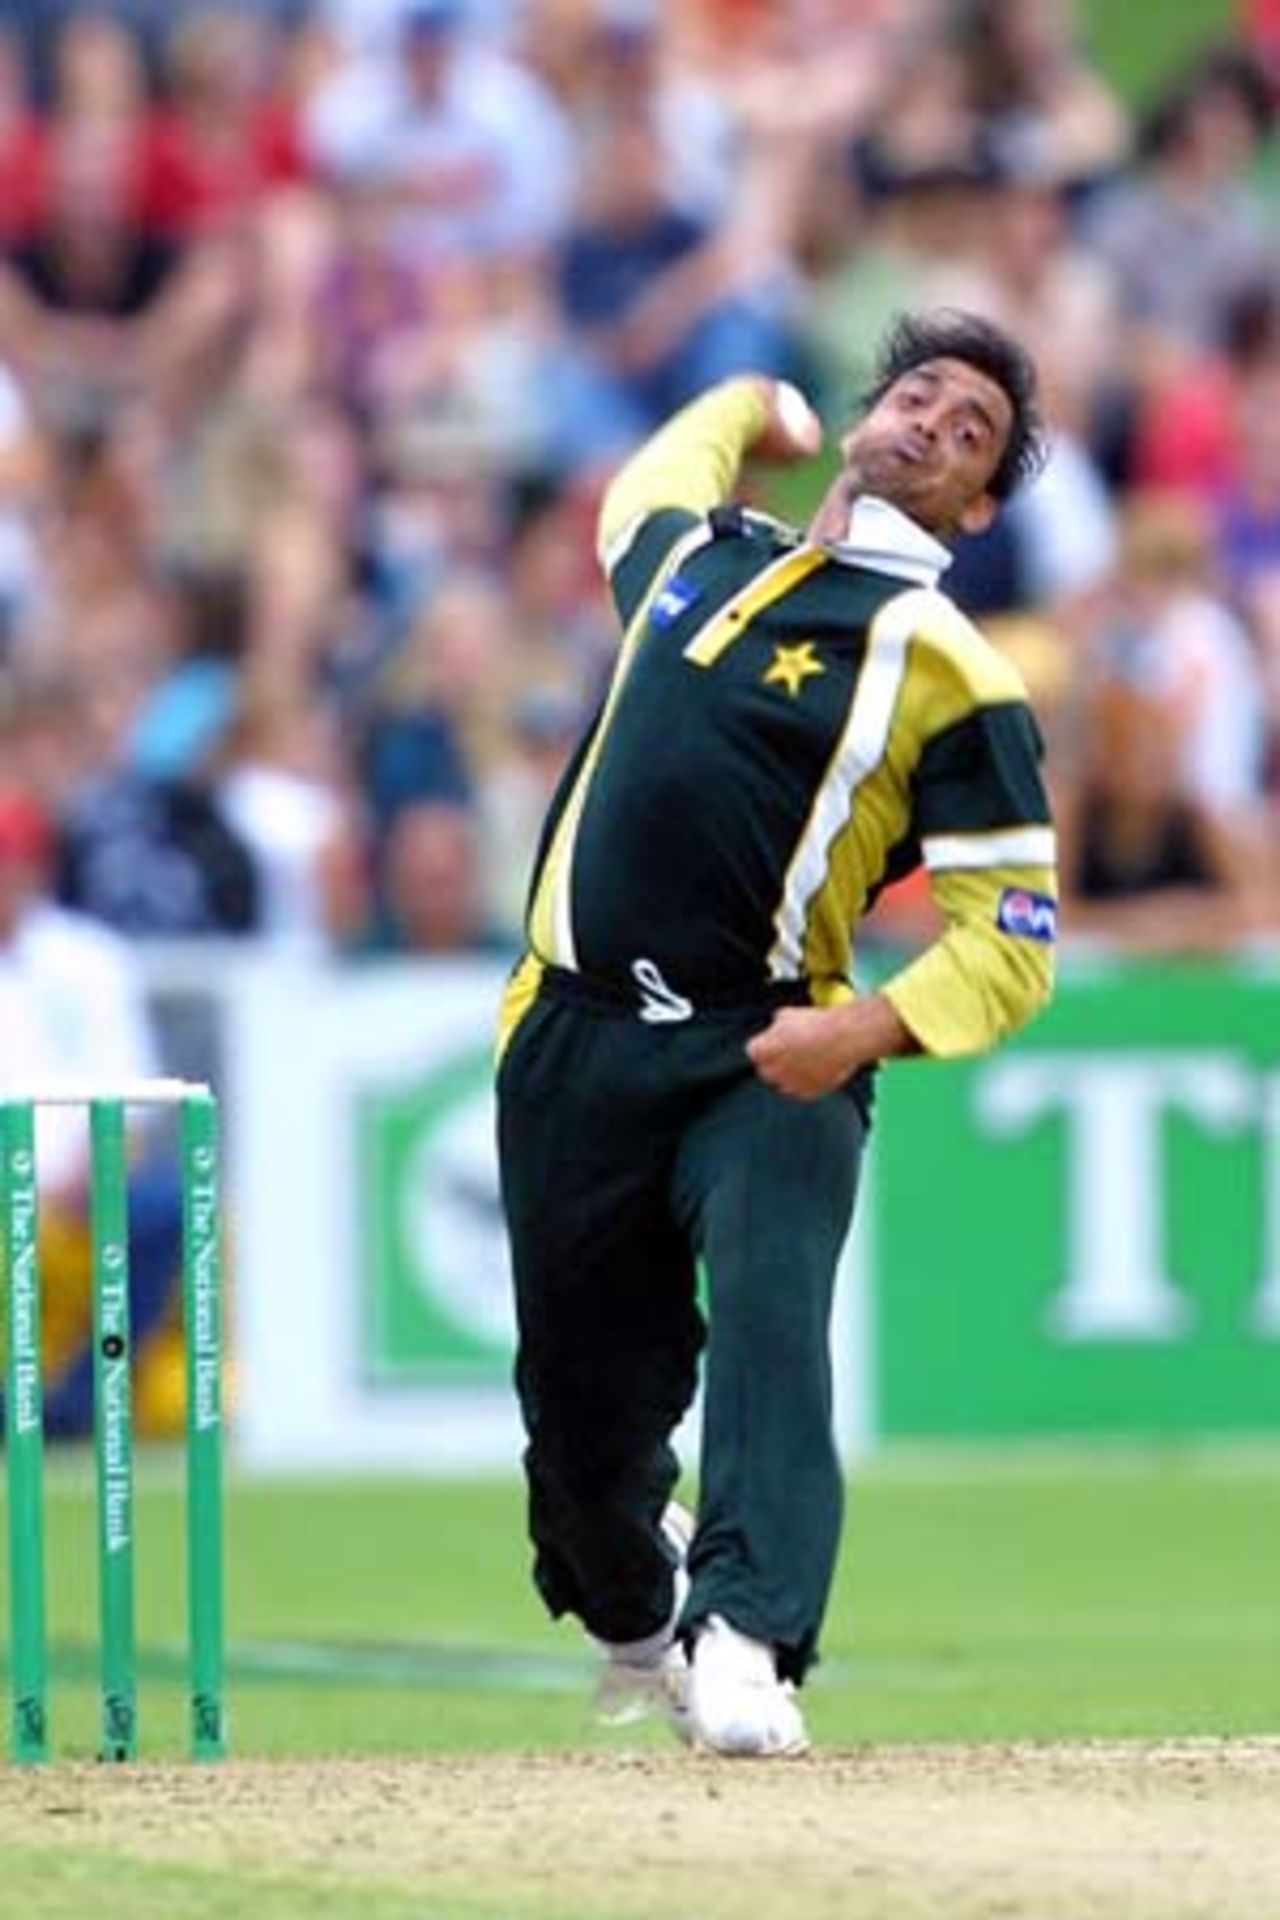 Pakistan fast bowler Shoaib Akhtar delivers a ball in his first over. Shoaib left the field with a strained left quadricep muscle after three balls of his second over. 2nd One-Day International: New Zealand v Pakistan at McLean Park, Napier, 20 February 2001.